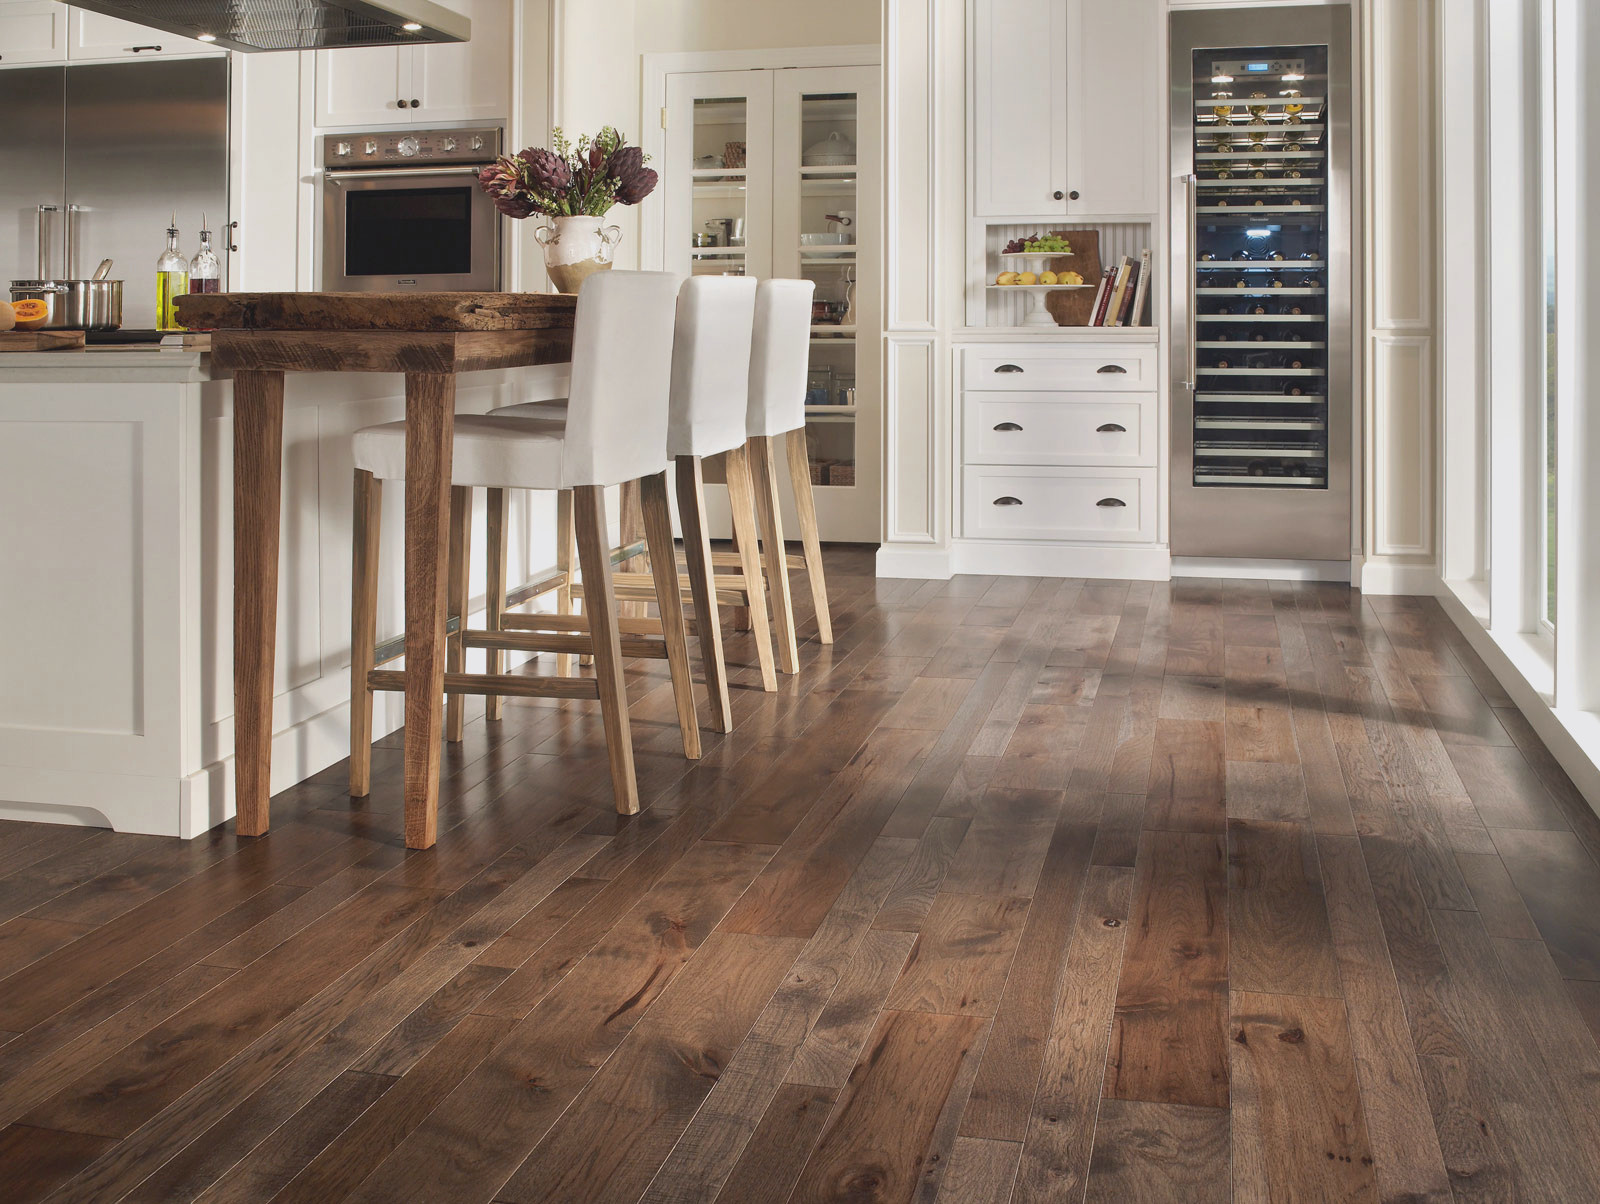 10 attractive How to Install Hardwood Floors Lowes 2024 free download how to install hardwood floors lowes of cool lowes kitchen flooring best home design modern at interior throughout cool lowes kitchen flooring best home design modern at interior designs of 